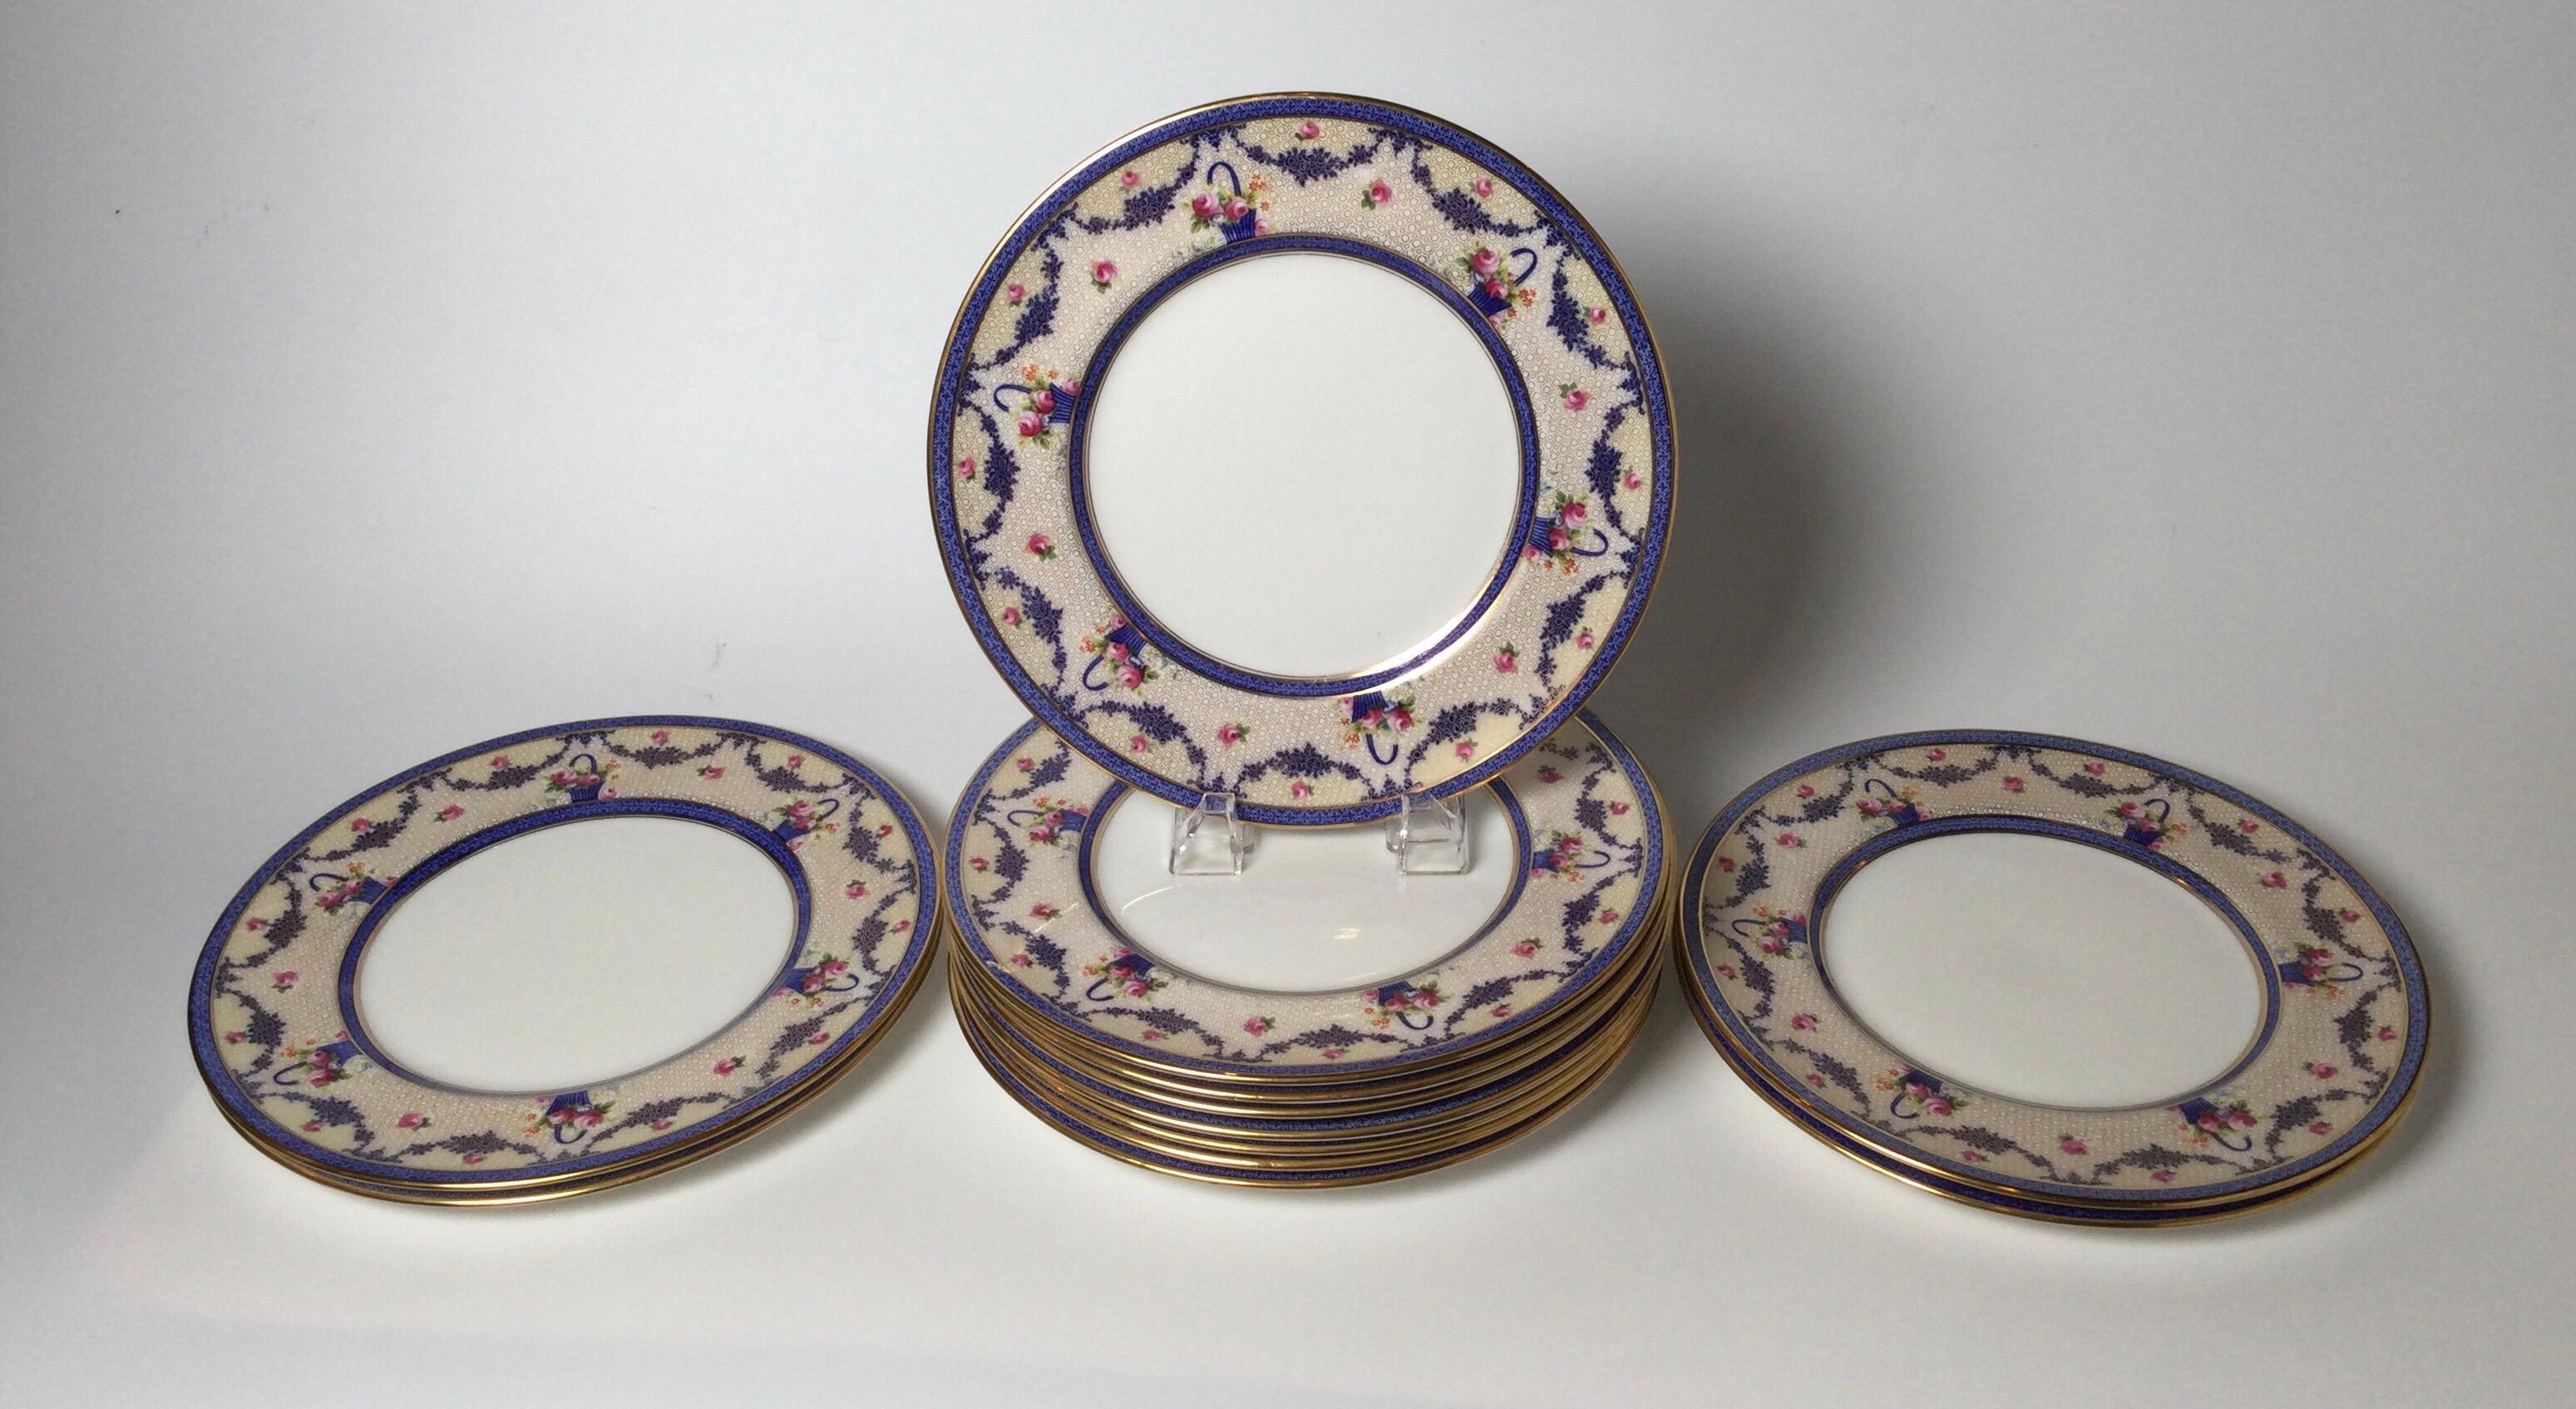 Elegant Edwardian service plates with gilt and floral borders by Herbert Betteley, the master decorator designer for Royal Doulton. The plates with cobalt and gold and floral decoration. England 1910.